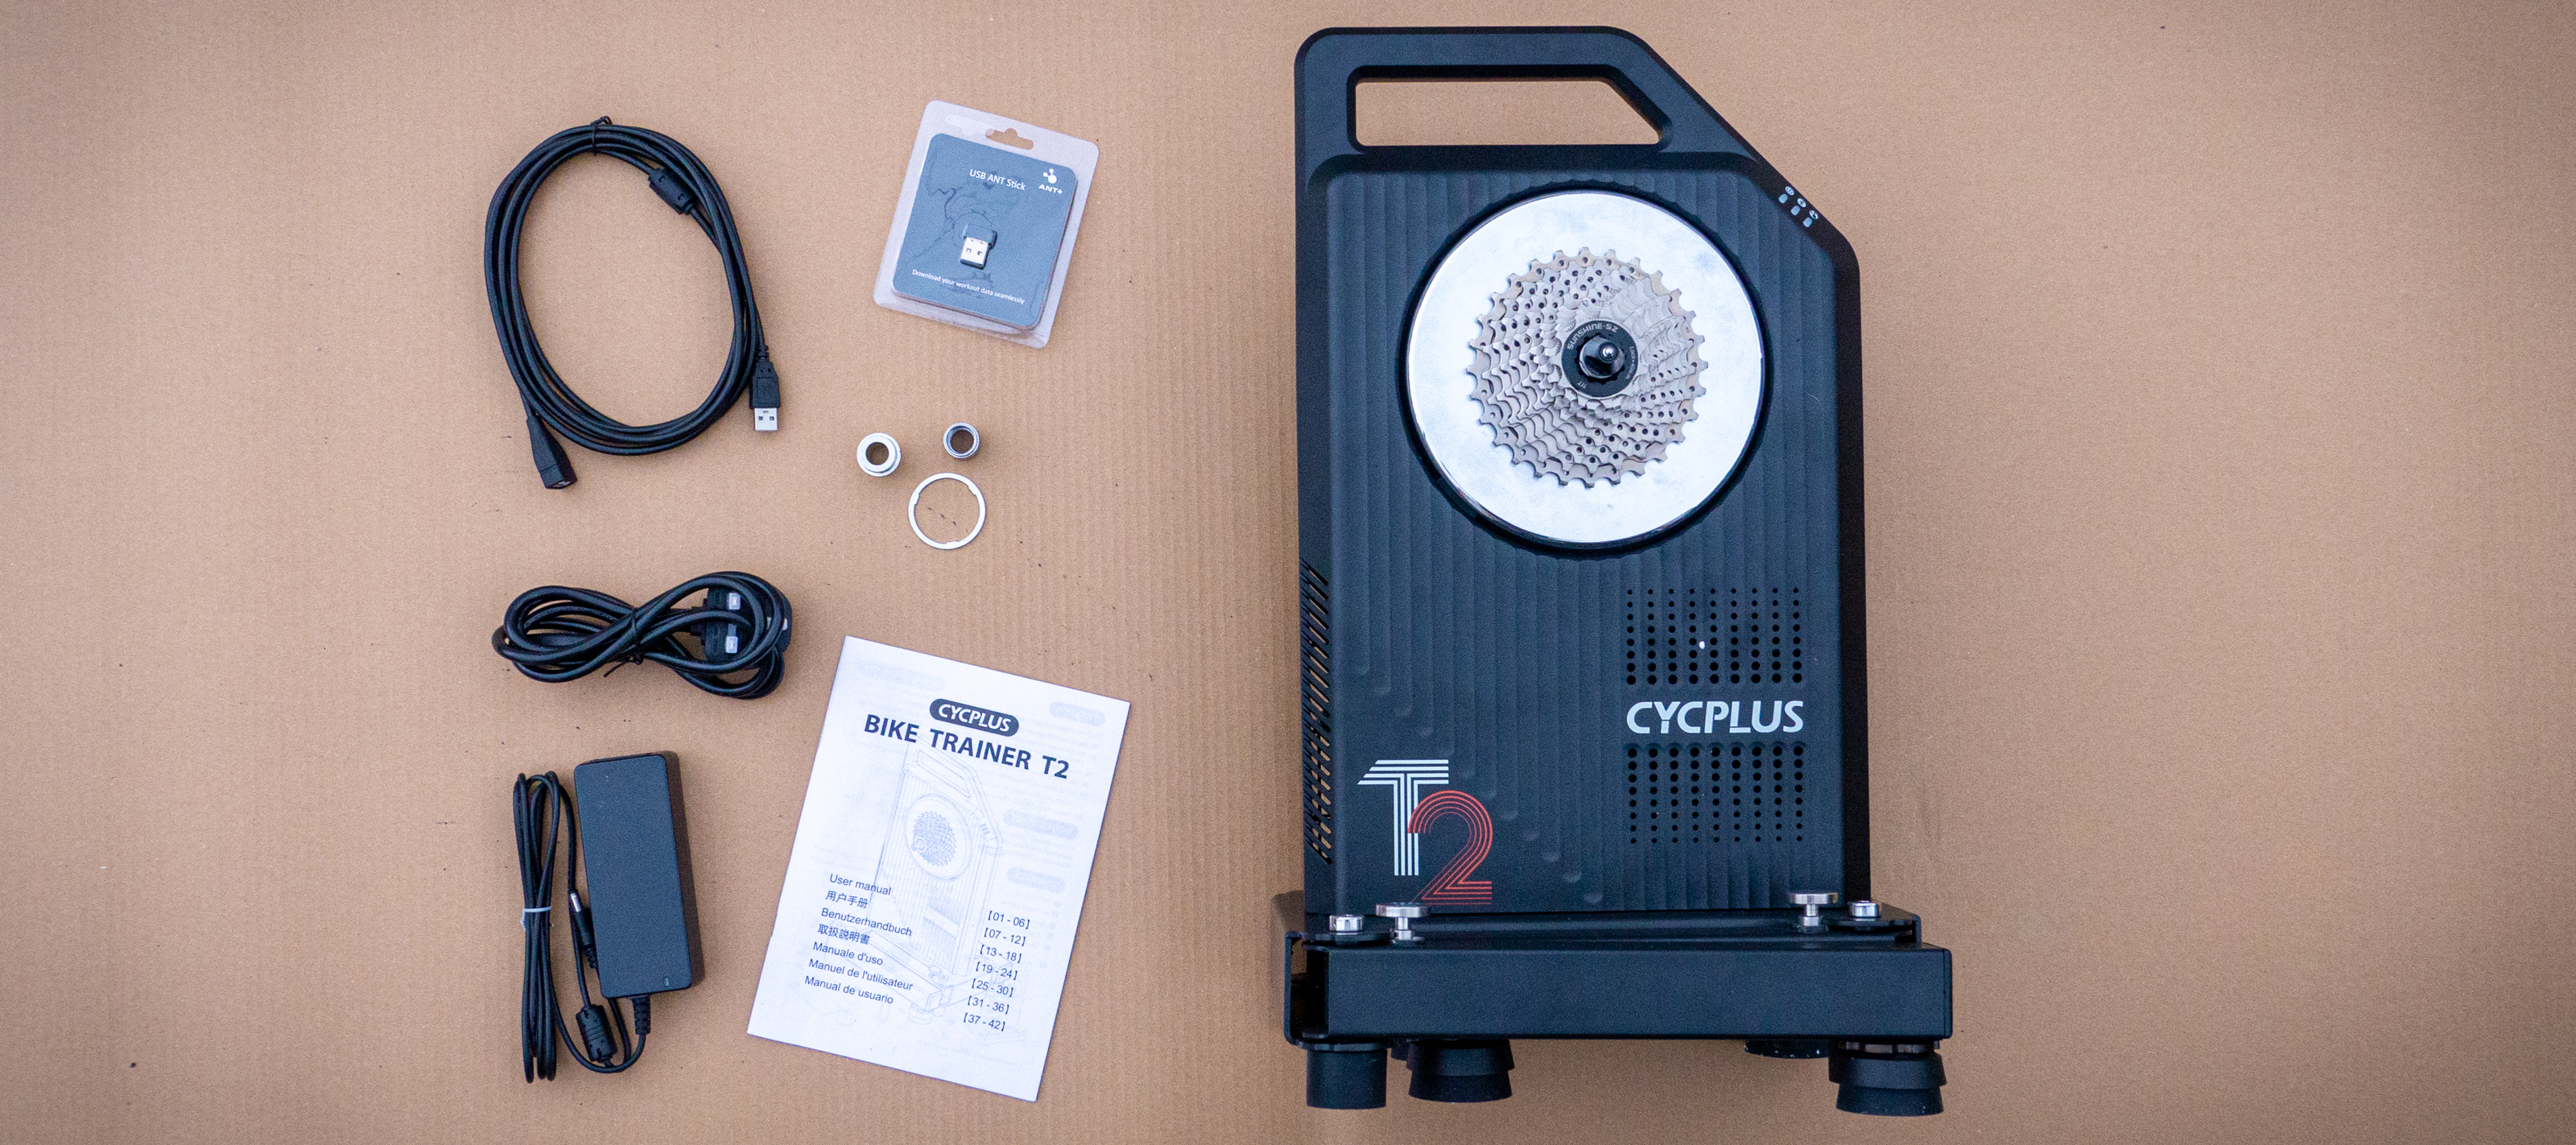 CYCPLUS T2 smart bike trainer is designed to suit your goals